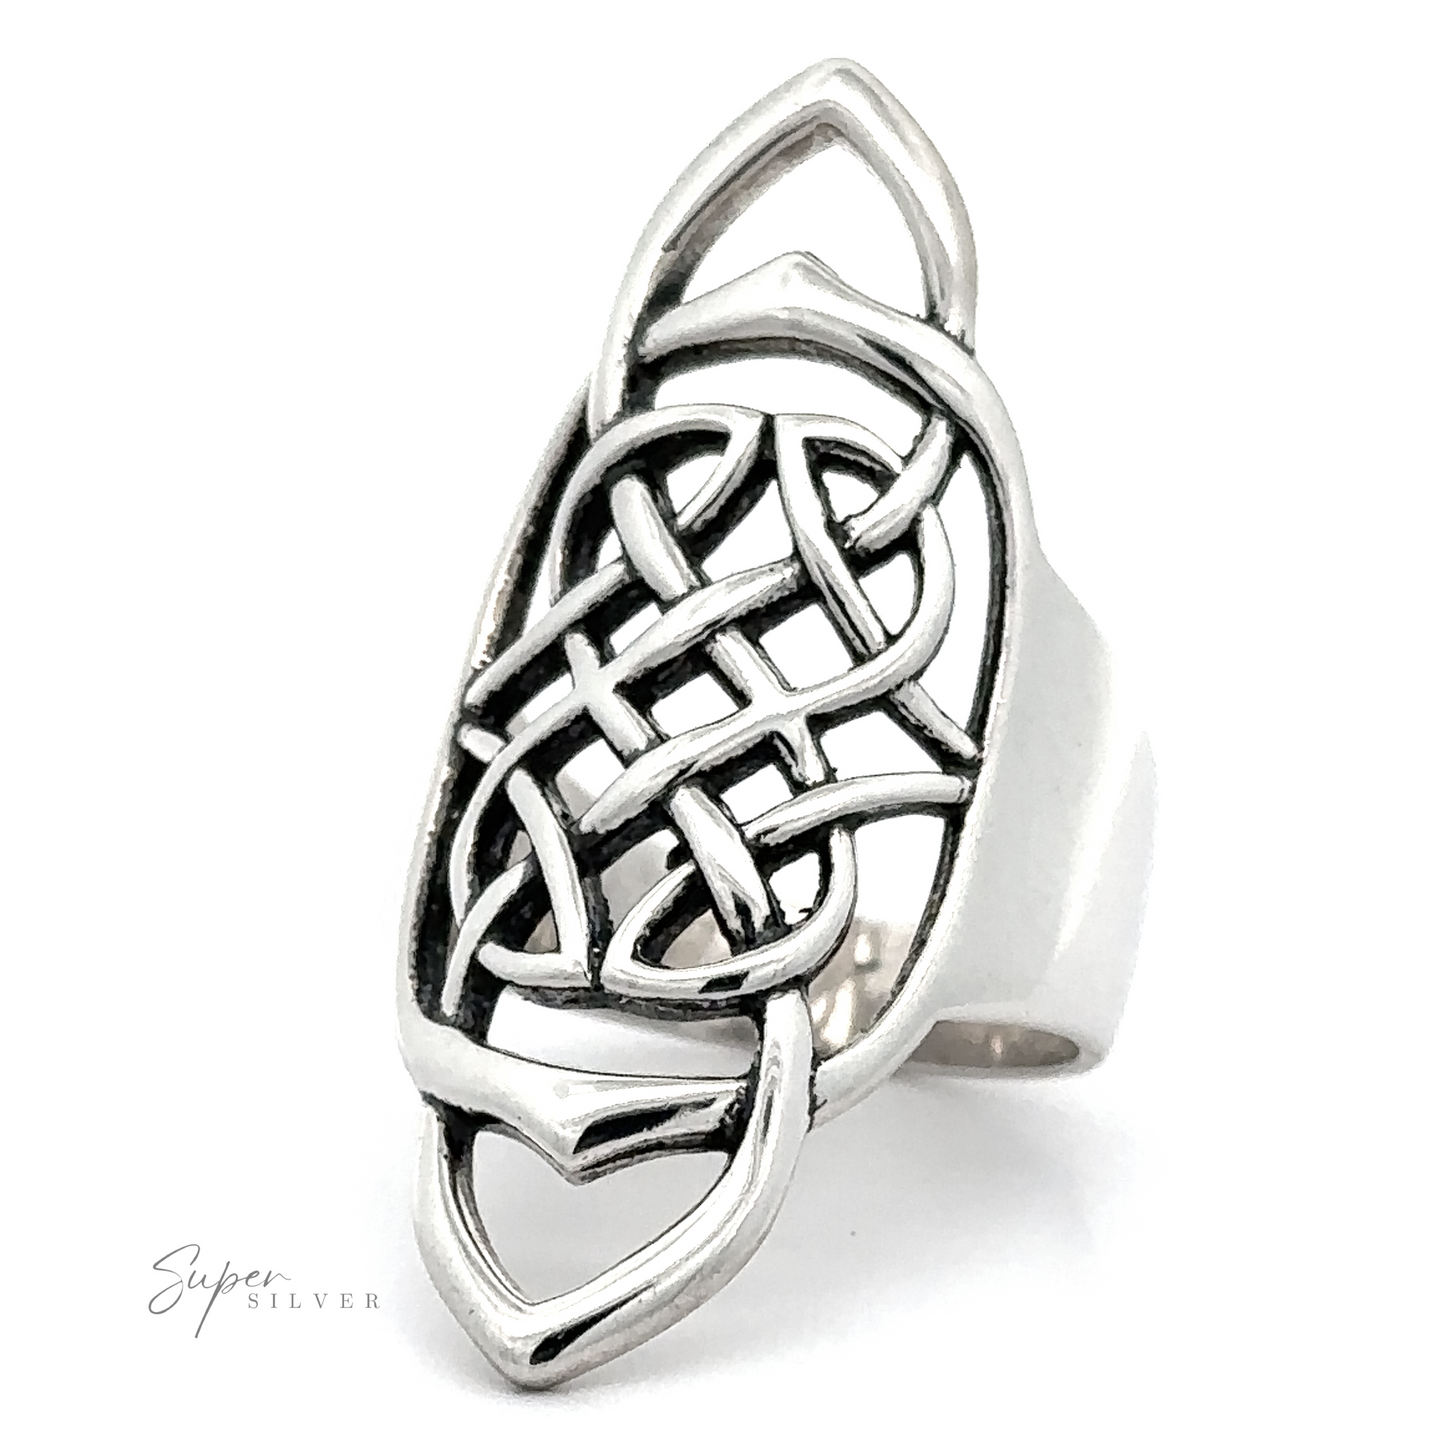 A silver elongated celtic knot ring.